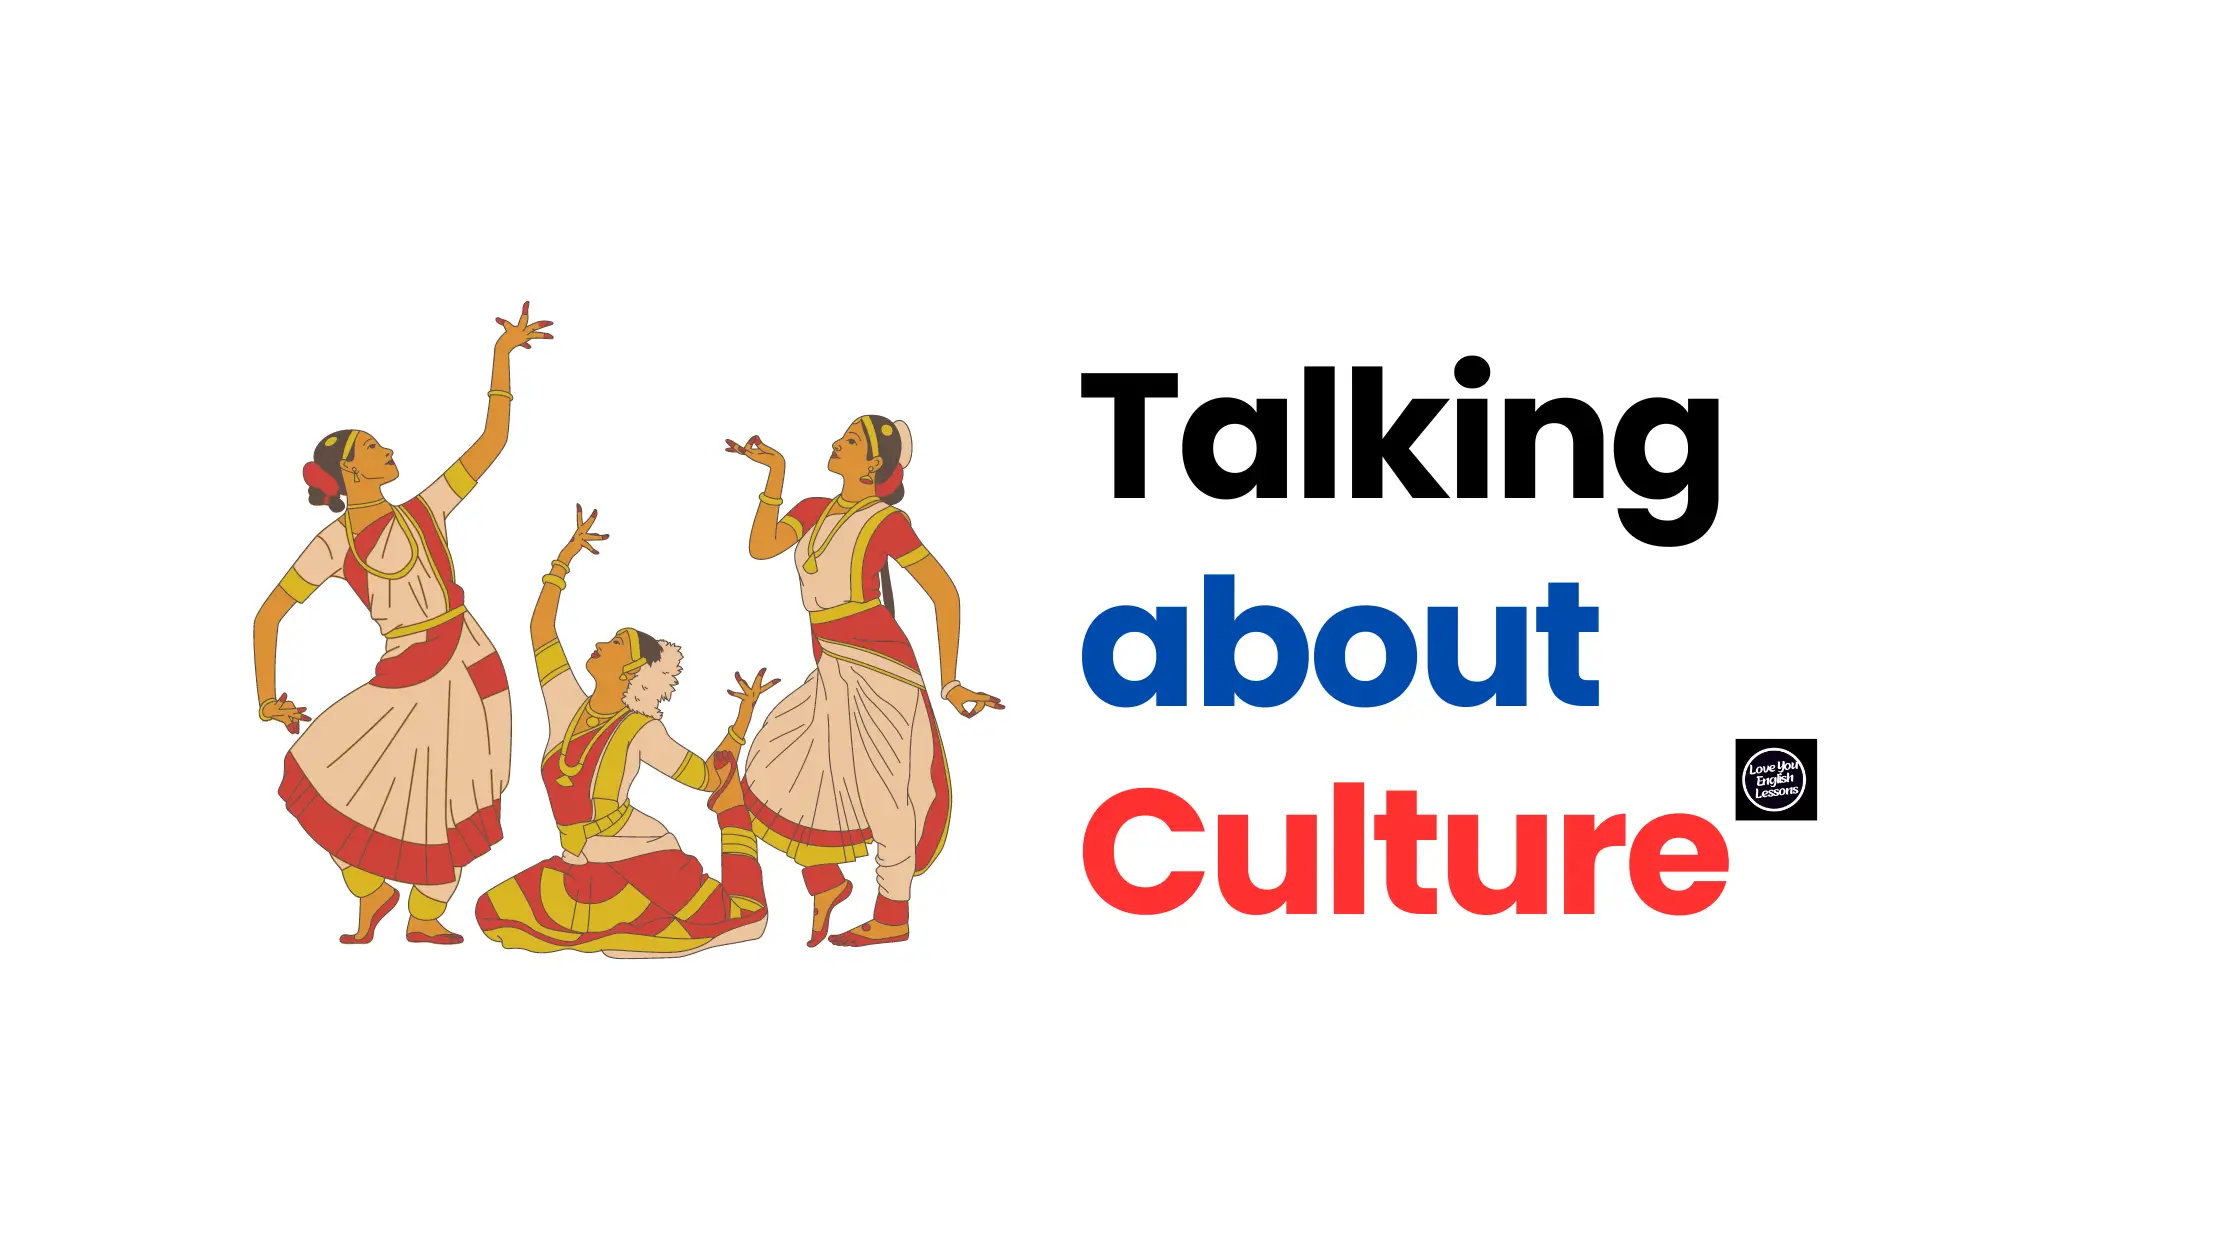 Talking about culture in English